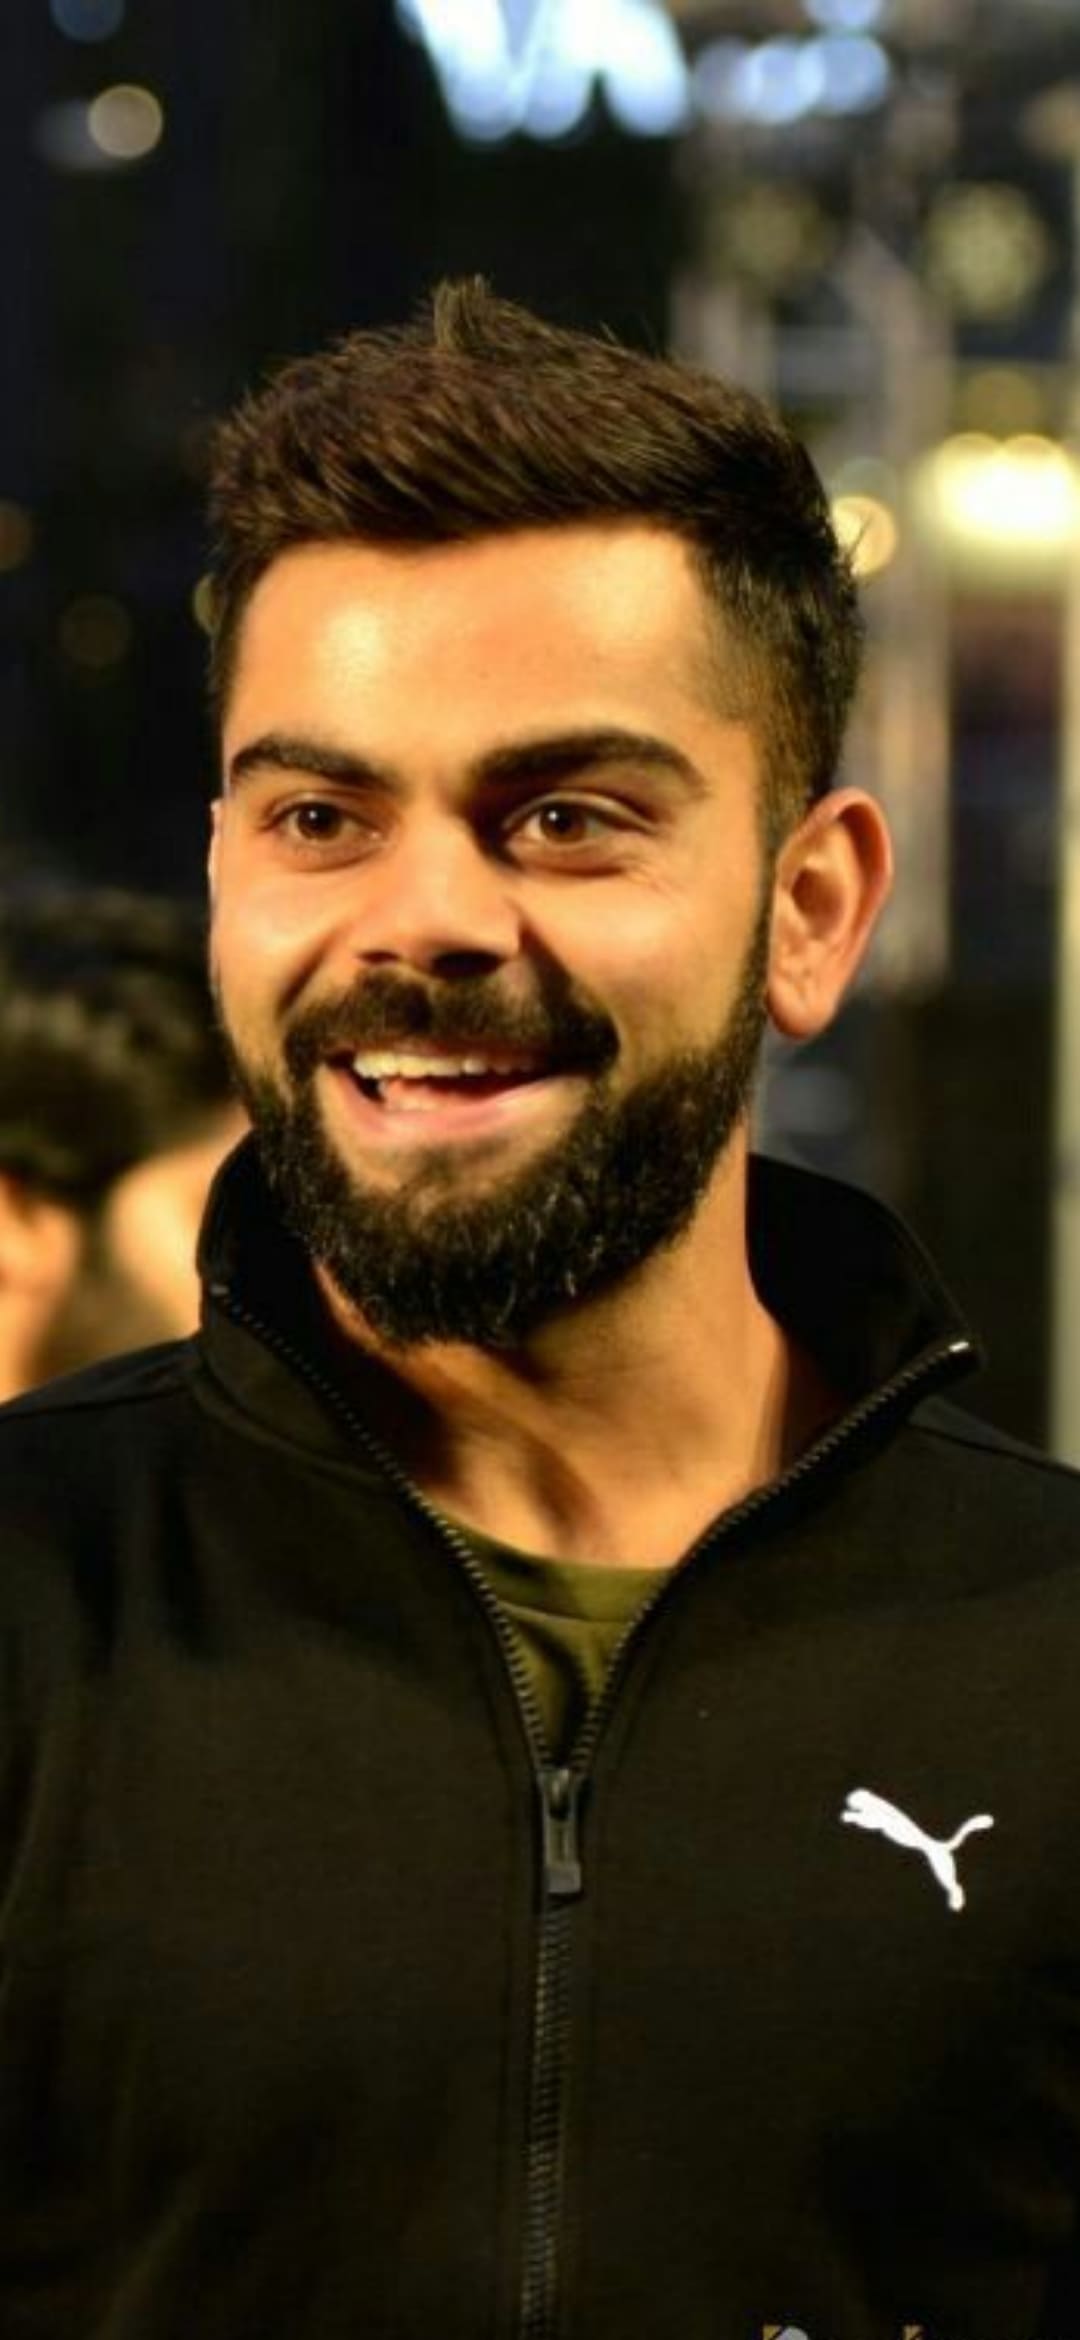 Virat Kohli Wallpapers Download New Wallpaper Virat Kohli 2930165 Hd Wallpaper Backgrounds Download This is free to use, this super amoled mobile wallpaper is 1080p full hd to fit for your high resolution screen. virat kohli wallpapers download new